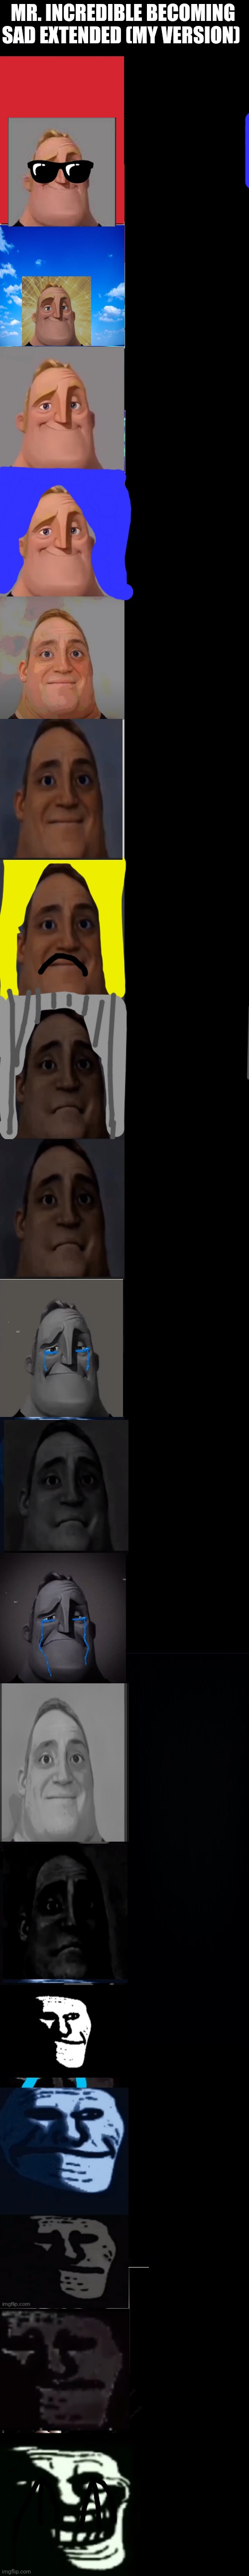 Mr. Incredible becoming sad (Hint from Siniy Qrandash) | MR. INCREDIBLE BECOMING SAD EXTENDED (MY VERSION) | image tagged in mr incredible becoming sad 3rd extension | made w/ Imgflip meme maker